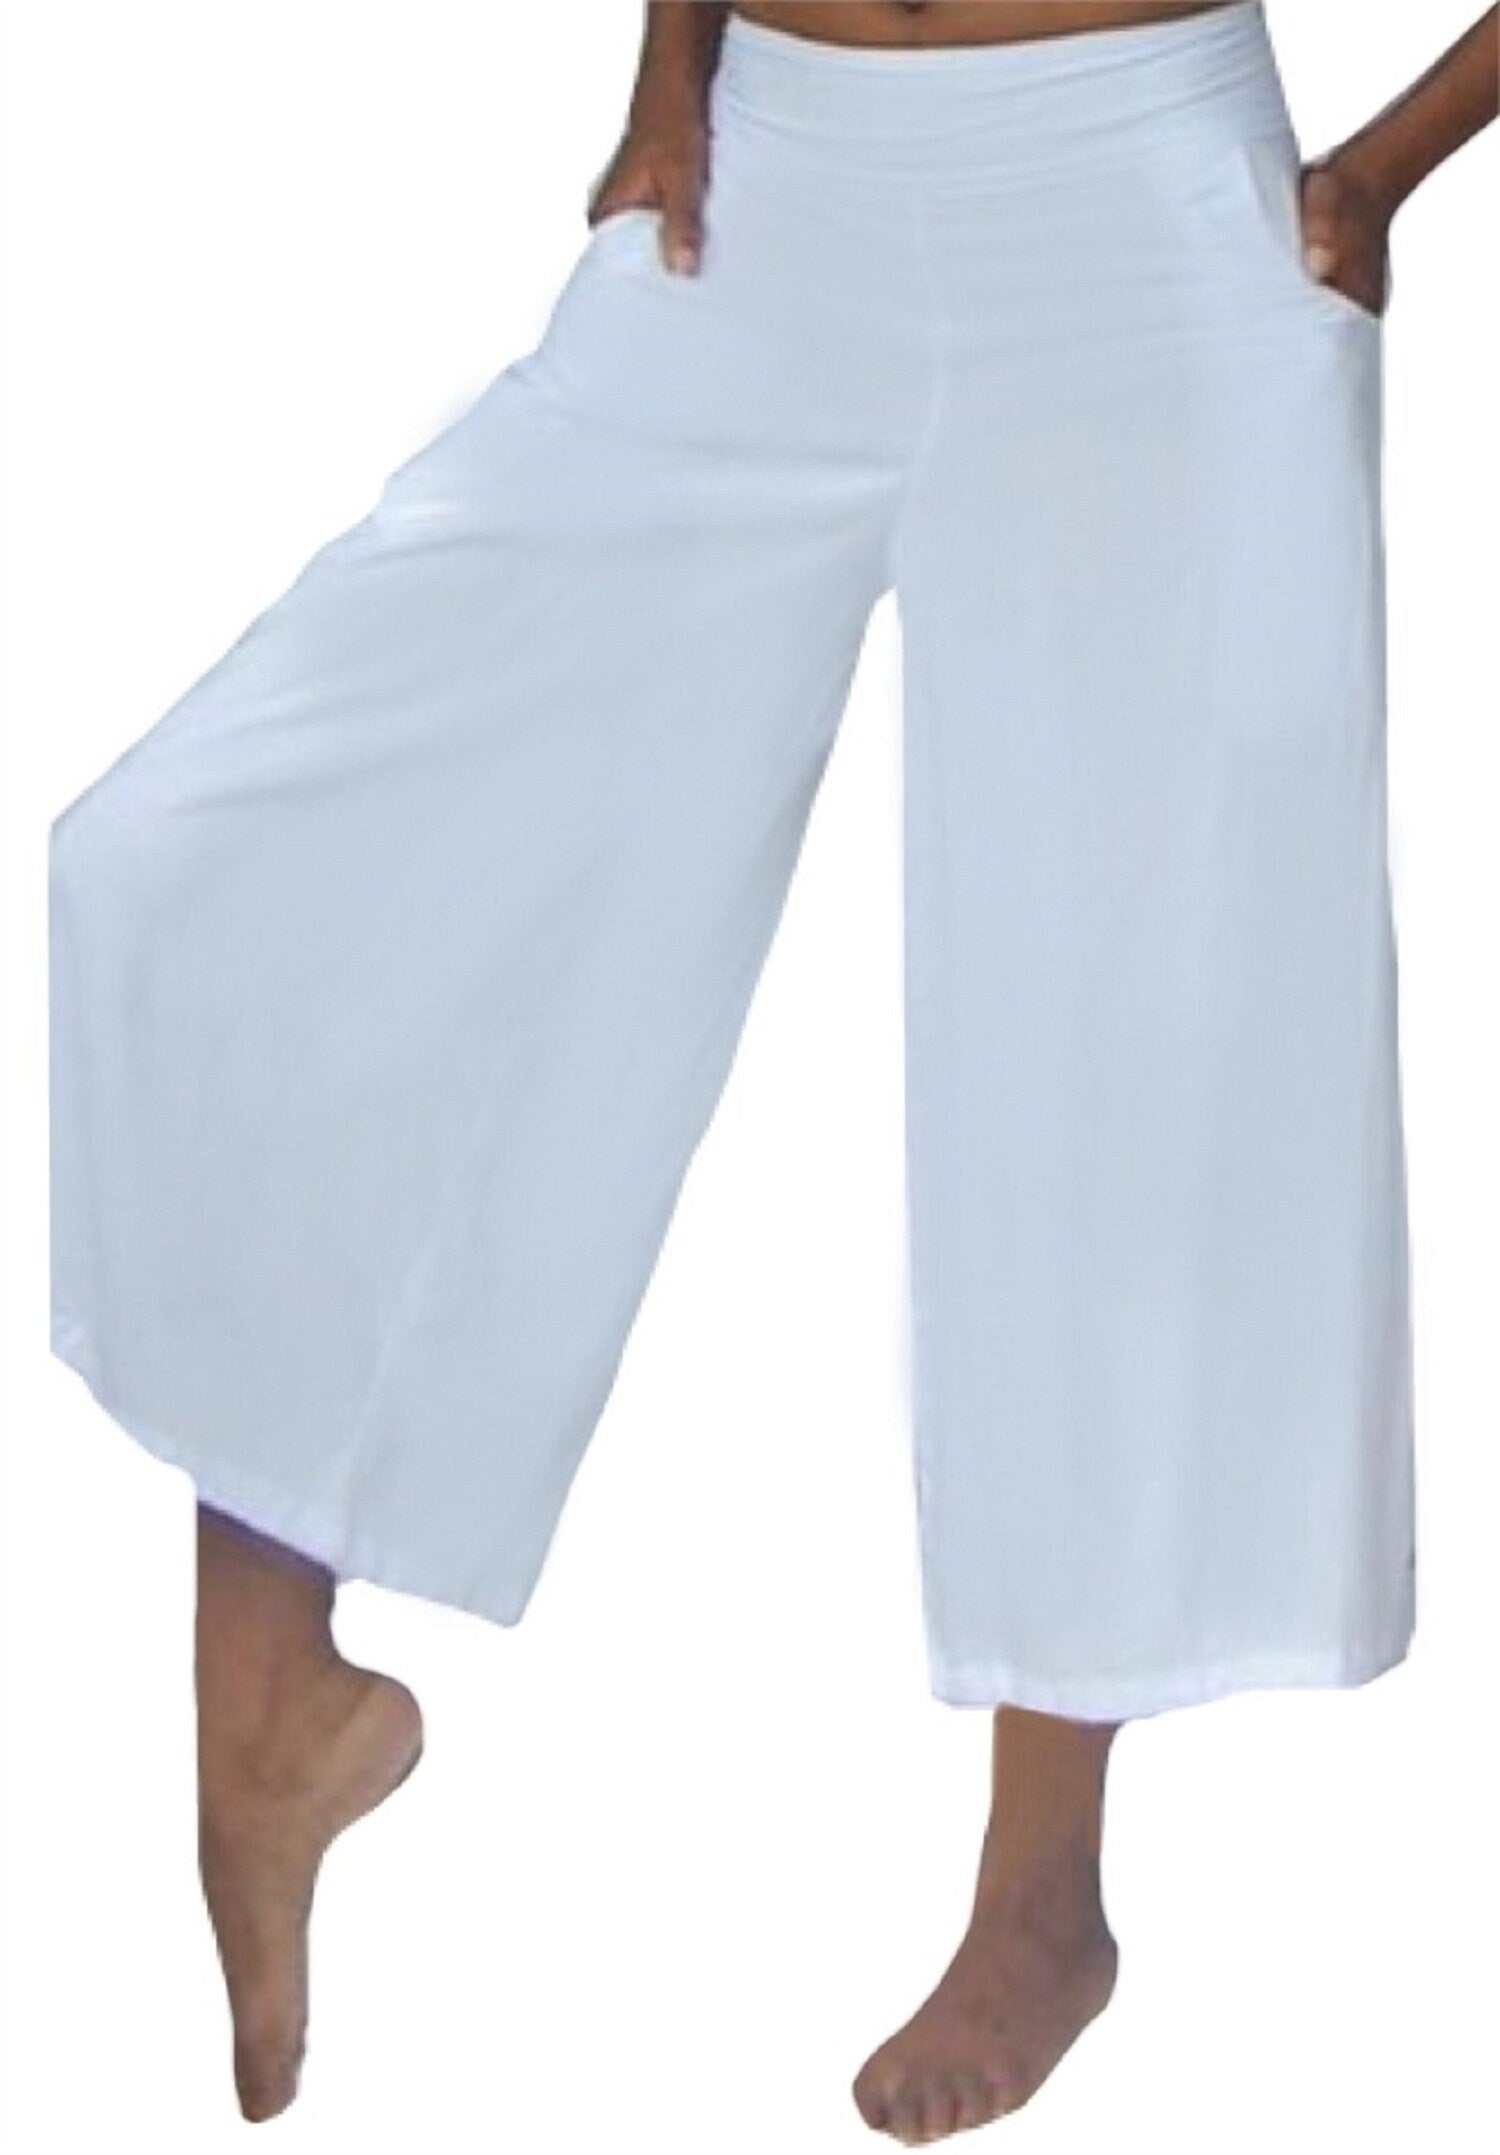 Wrap Tie Palazzo Pants with Wide Leg for All Sizes